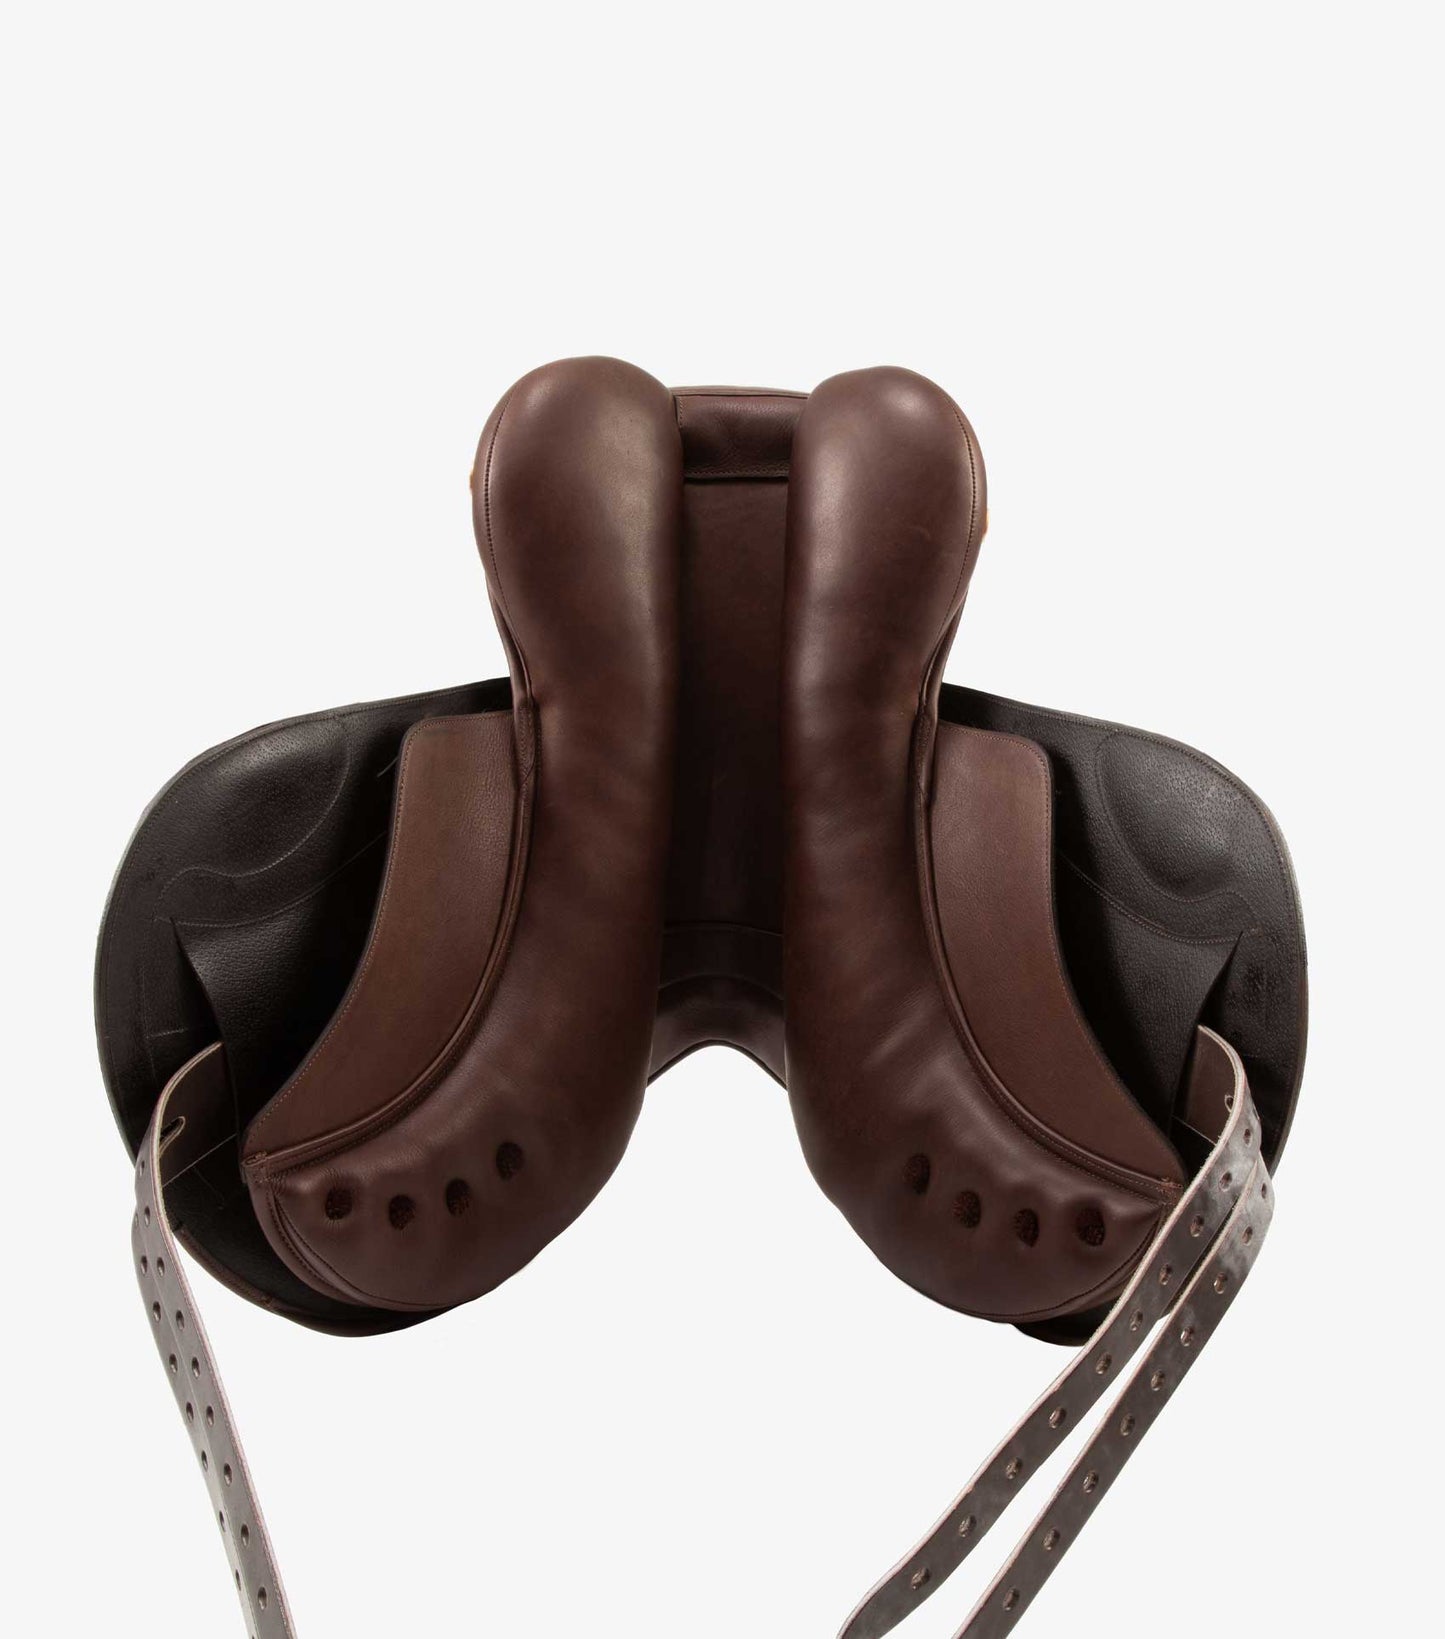 Premier Equine Deauville Leather Monoflap Cross Country Saddle (Brown)